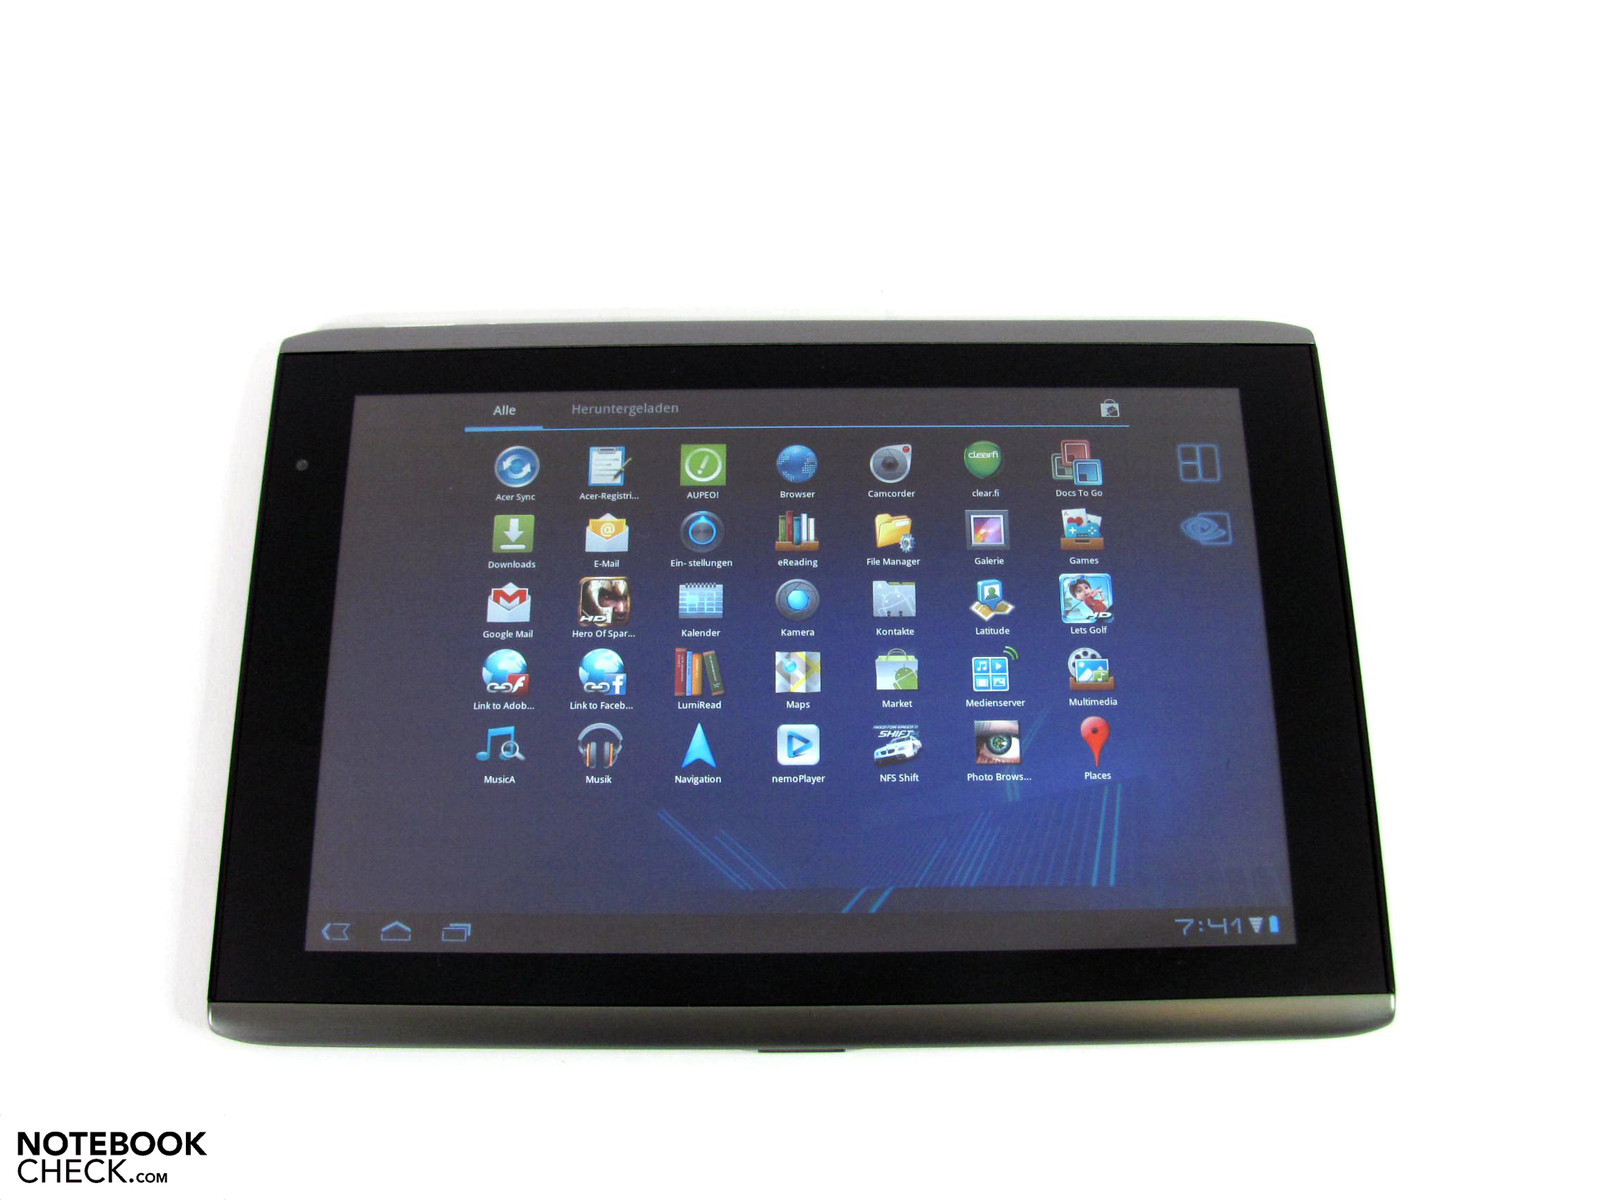 Análisis Acer Iconia Tab A500 Tablet/MID - Notebookcheck.org